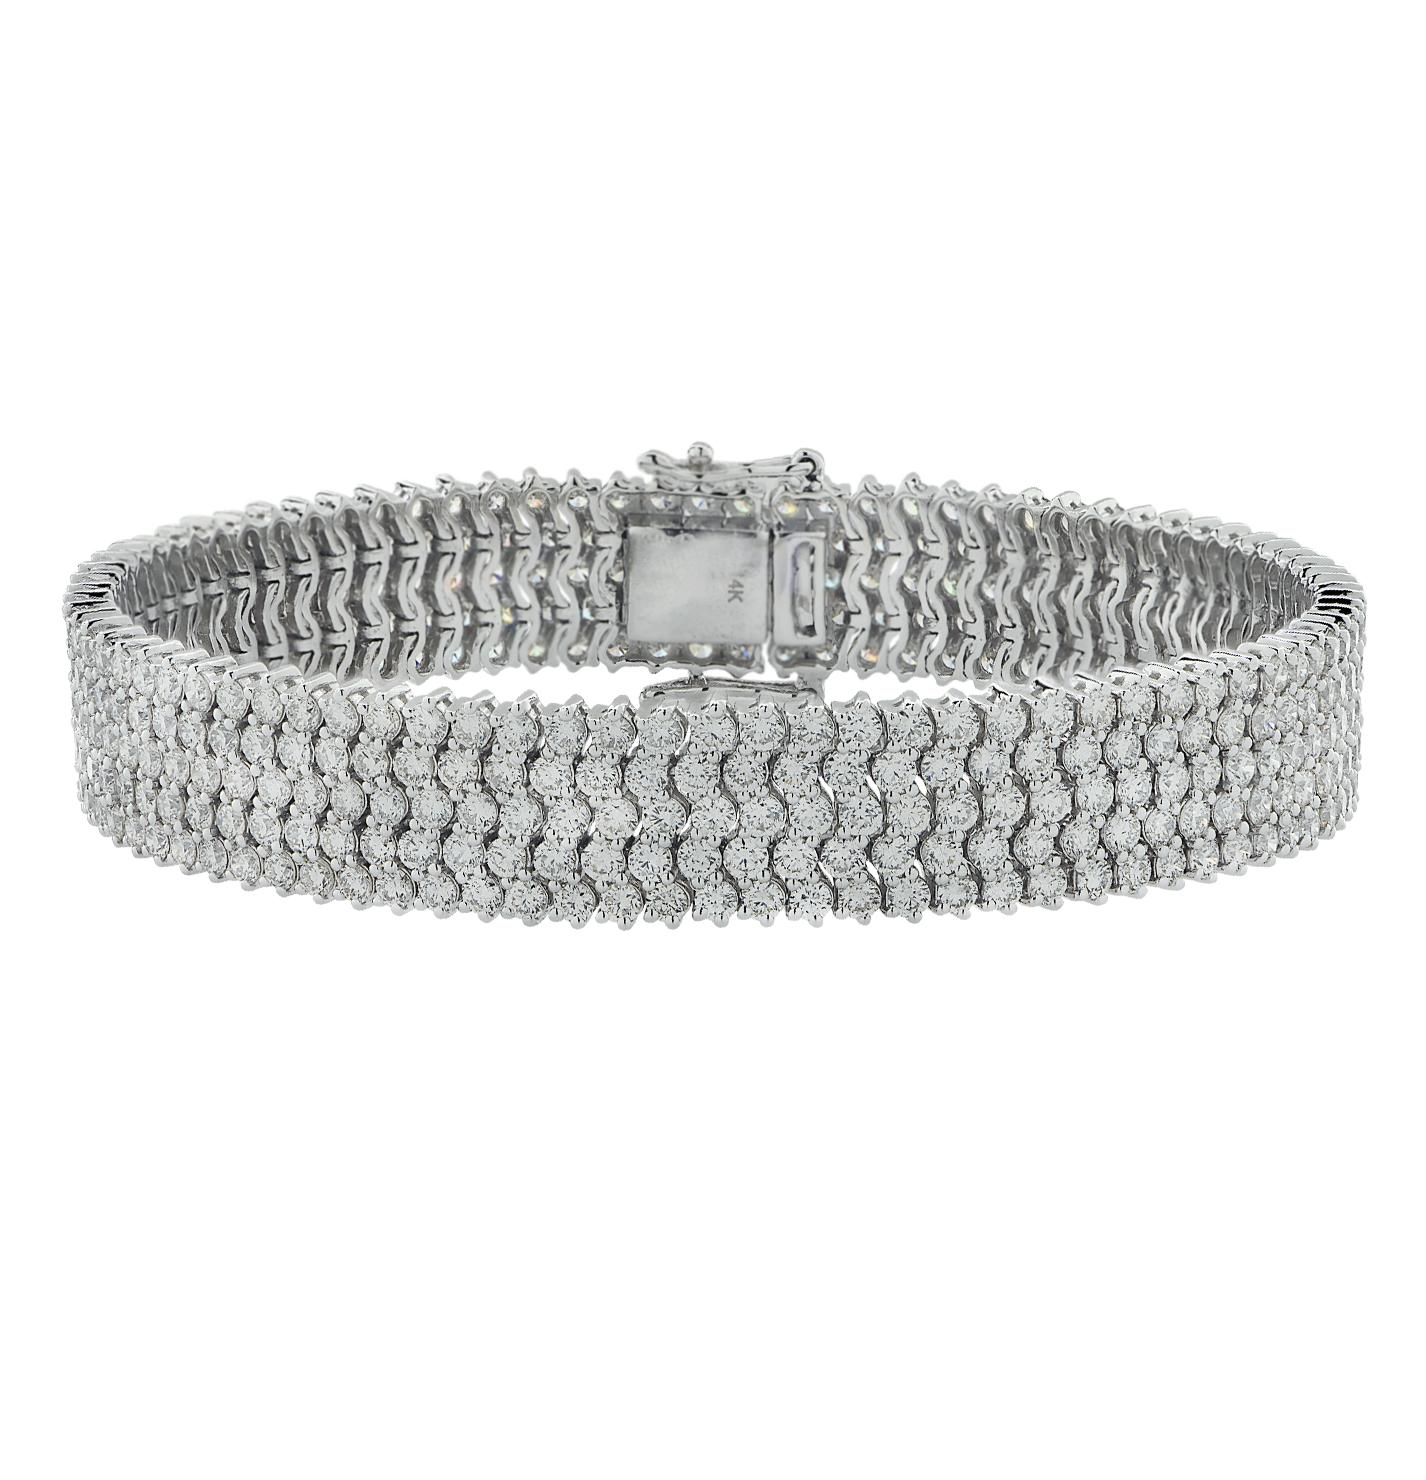 Luxurious five row diamond bracelet, crafted in white gold, featuring 414 round brilliant cut diamonds weighing approximately 12.40 carats total, G-H color, VS-SI clarity. The diamonds are set in waves flowing around the wrist in a sea of eternity,